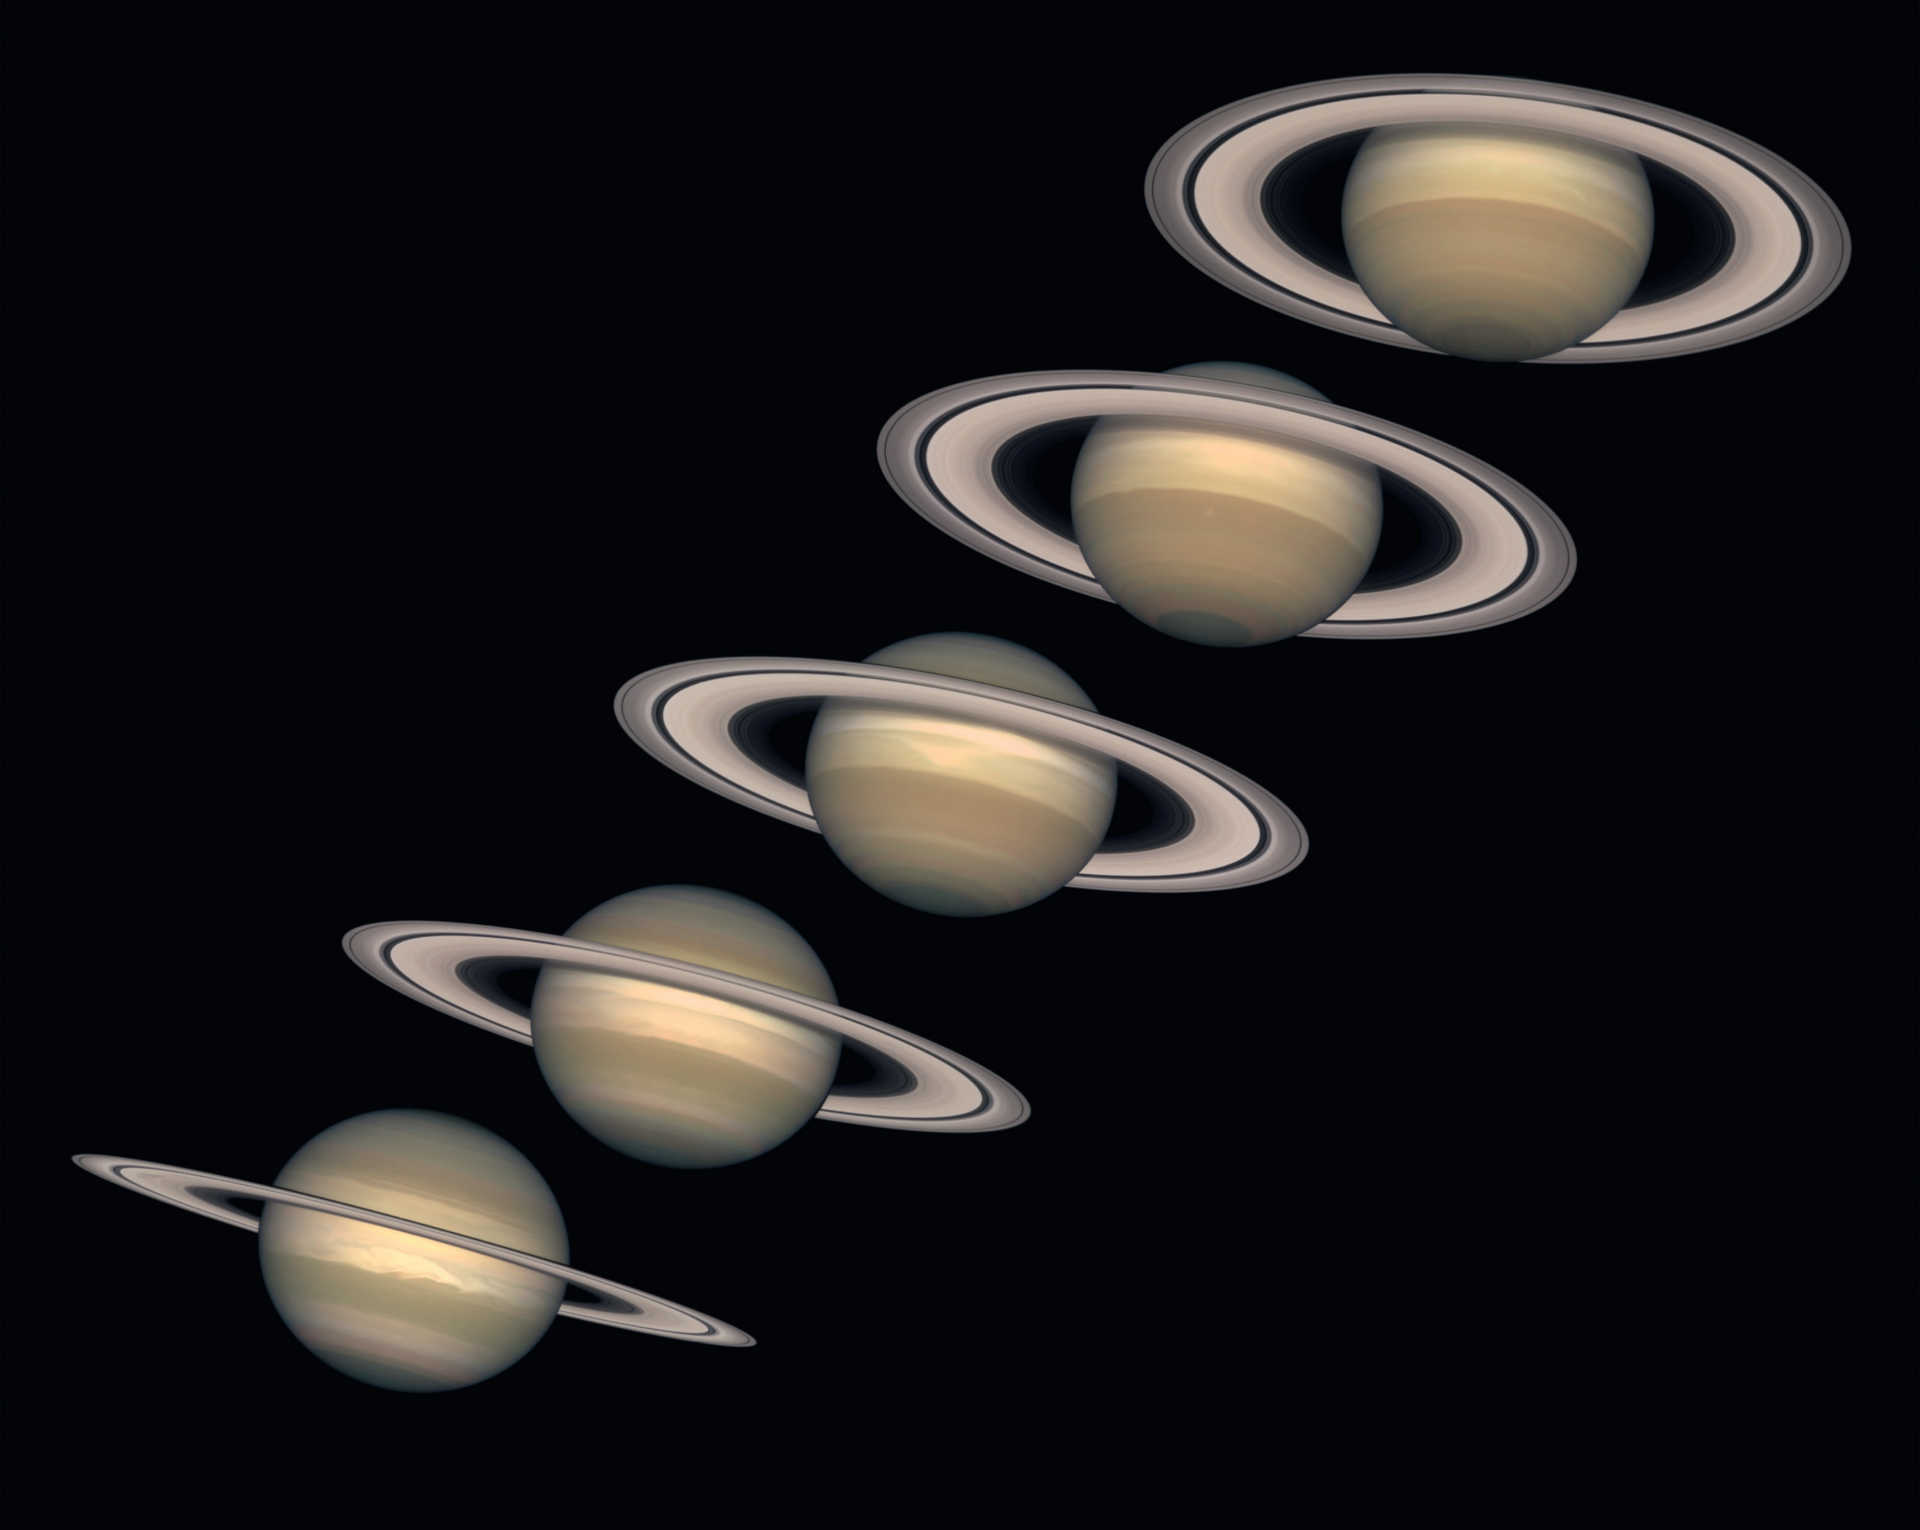 Saturn, as viewed from Earth in the years 1996 to 2000. NASA and The Hubble Heritage Team (STScI/AURA)